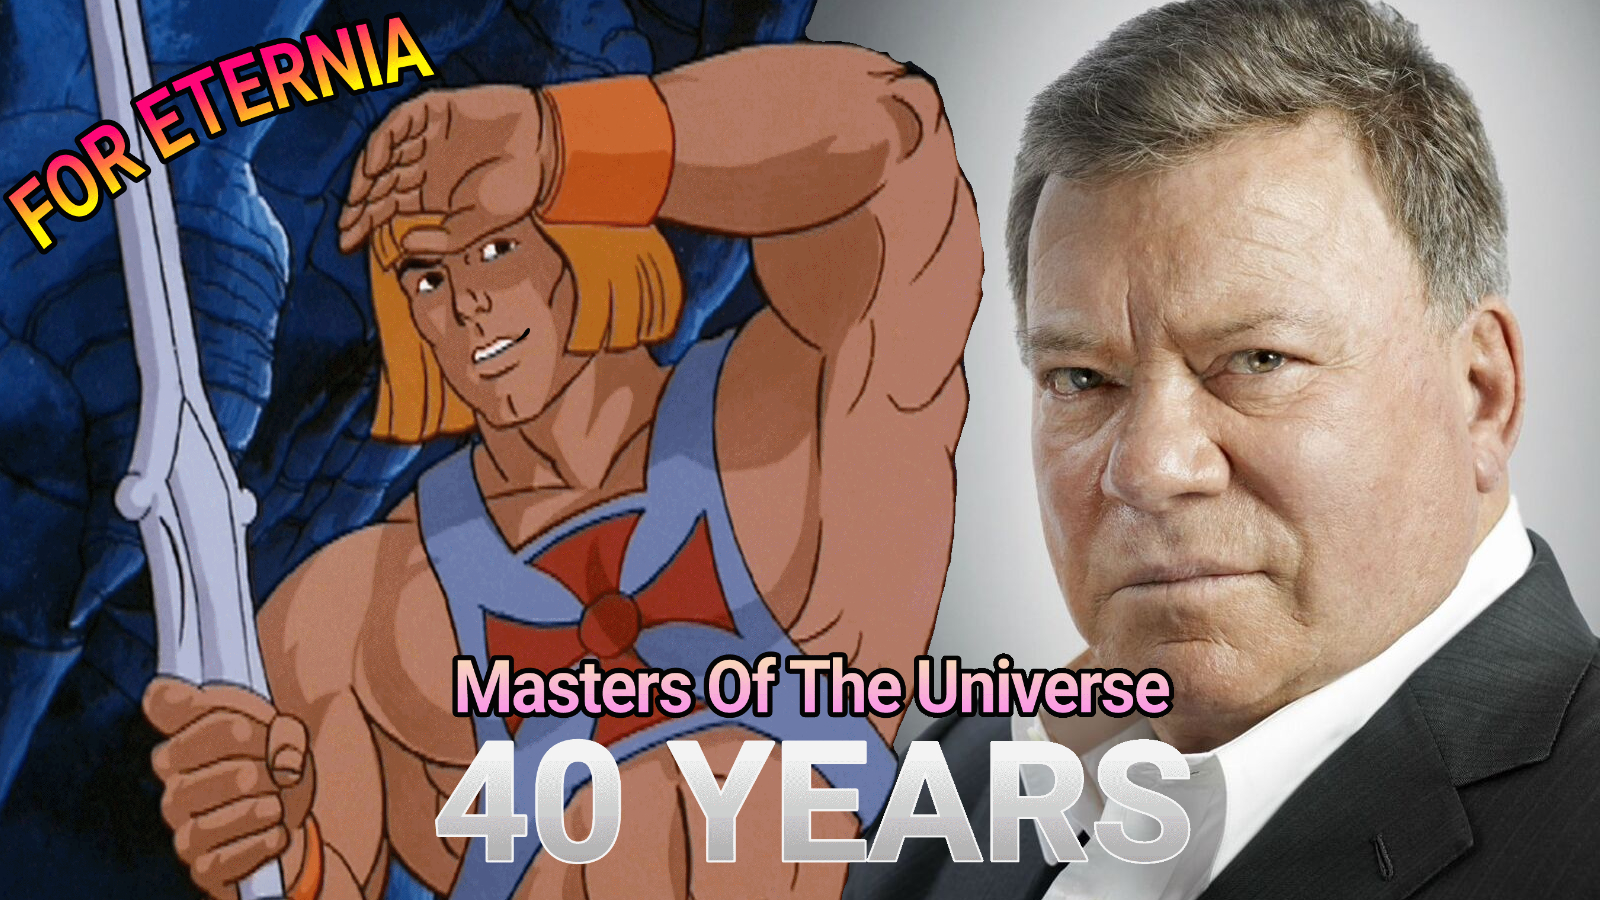 Actor William Shatner is joining the cast of ”Masters of the Universe: Revolution”!